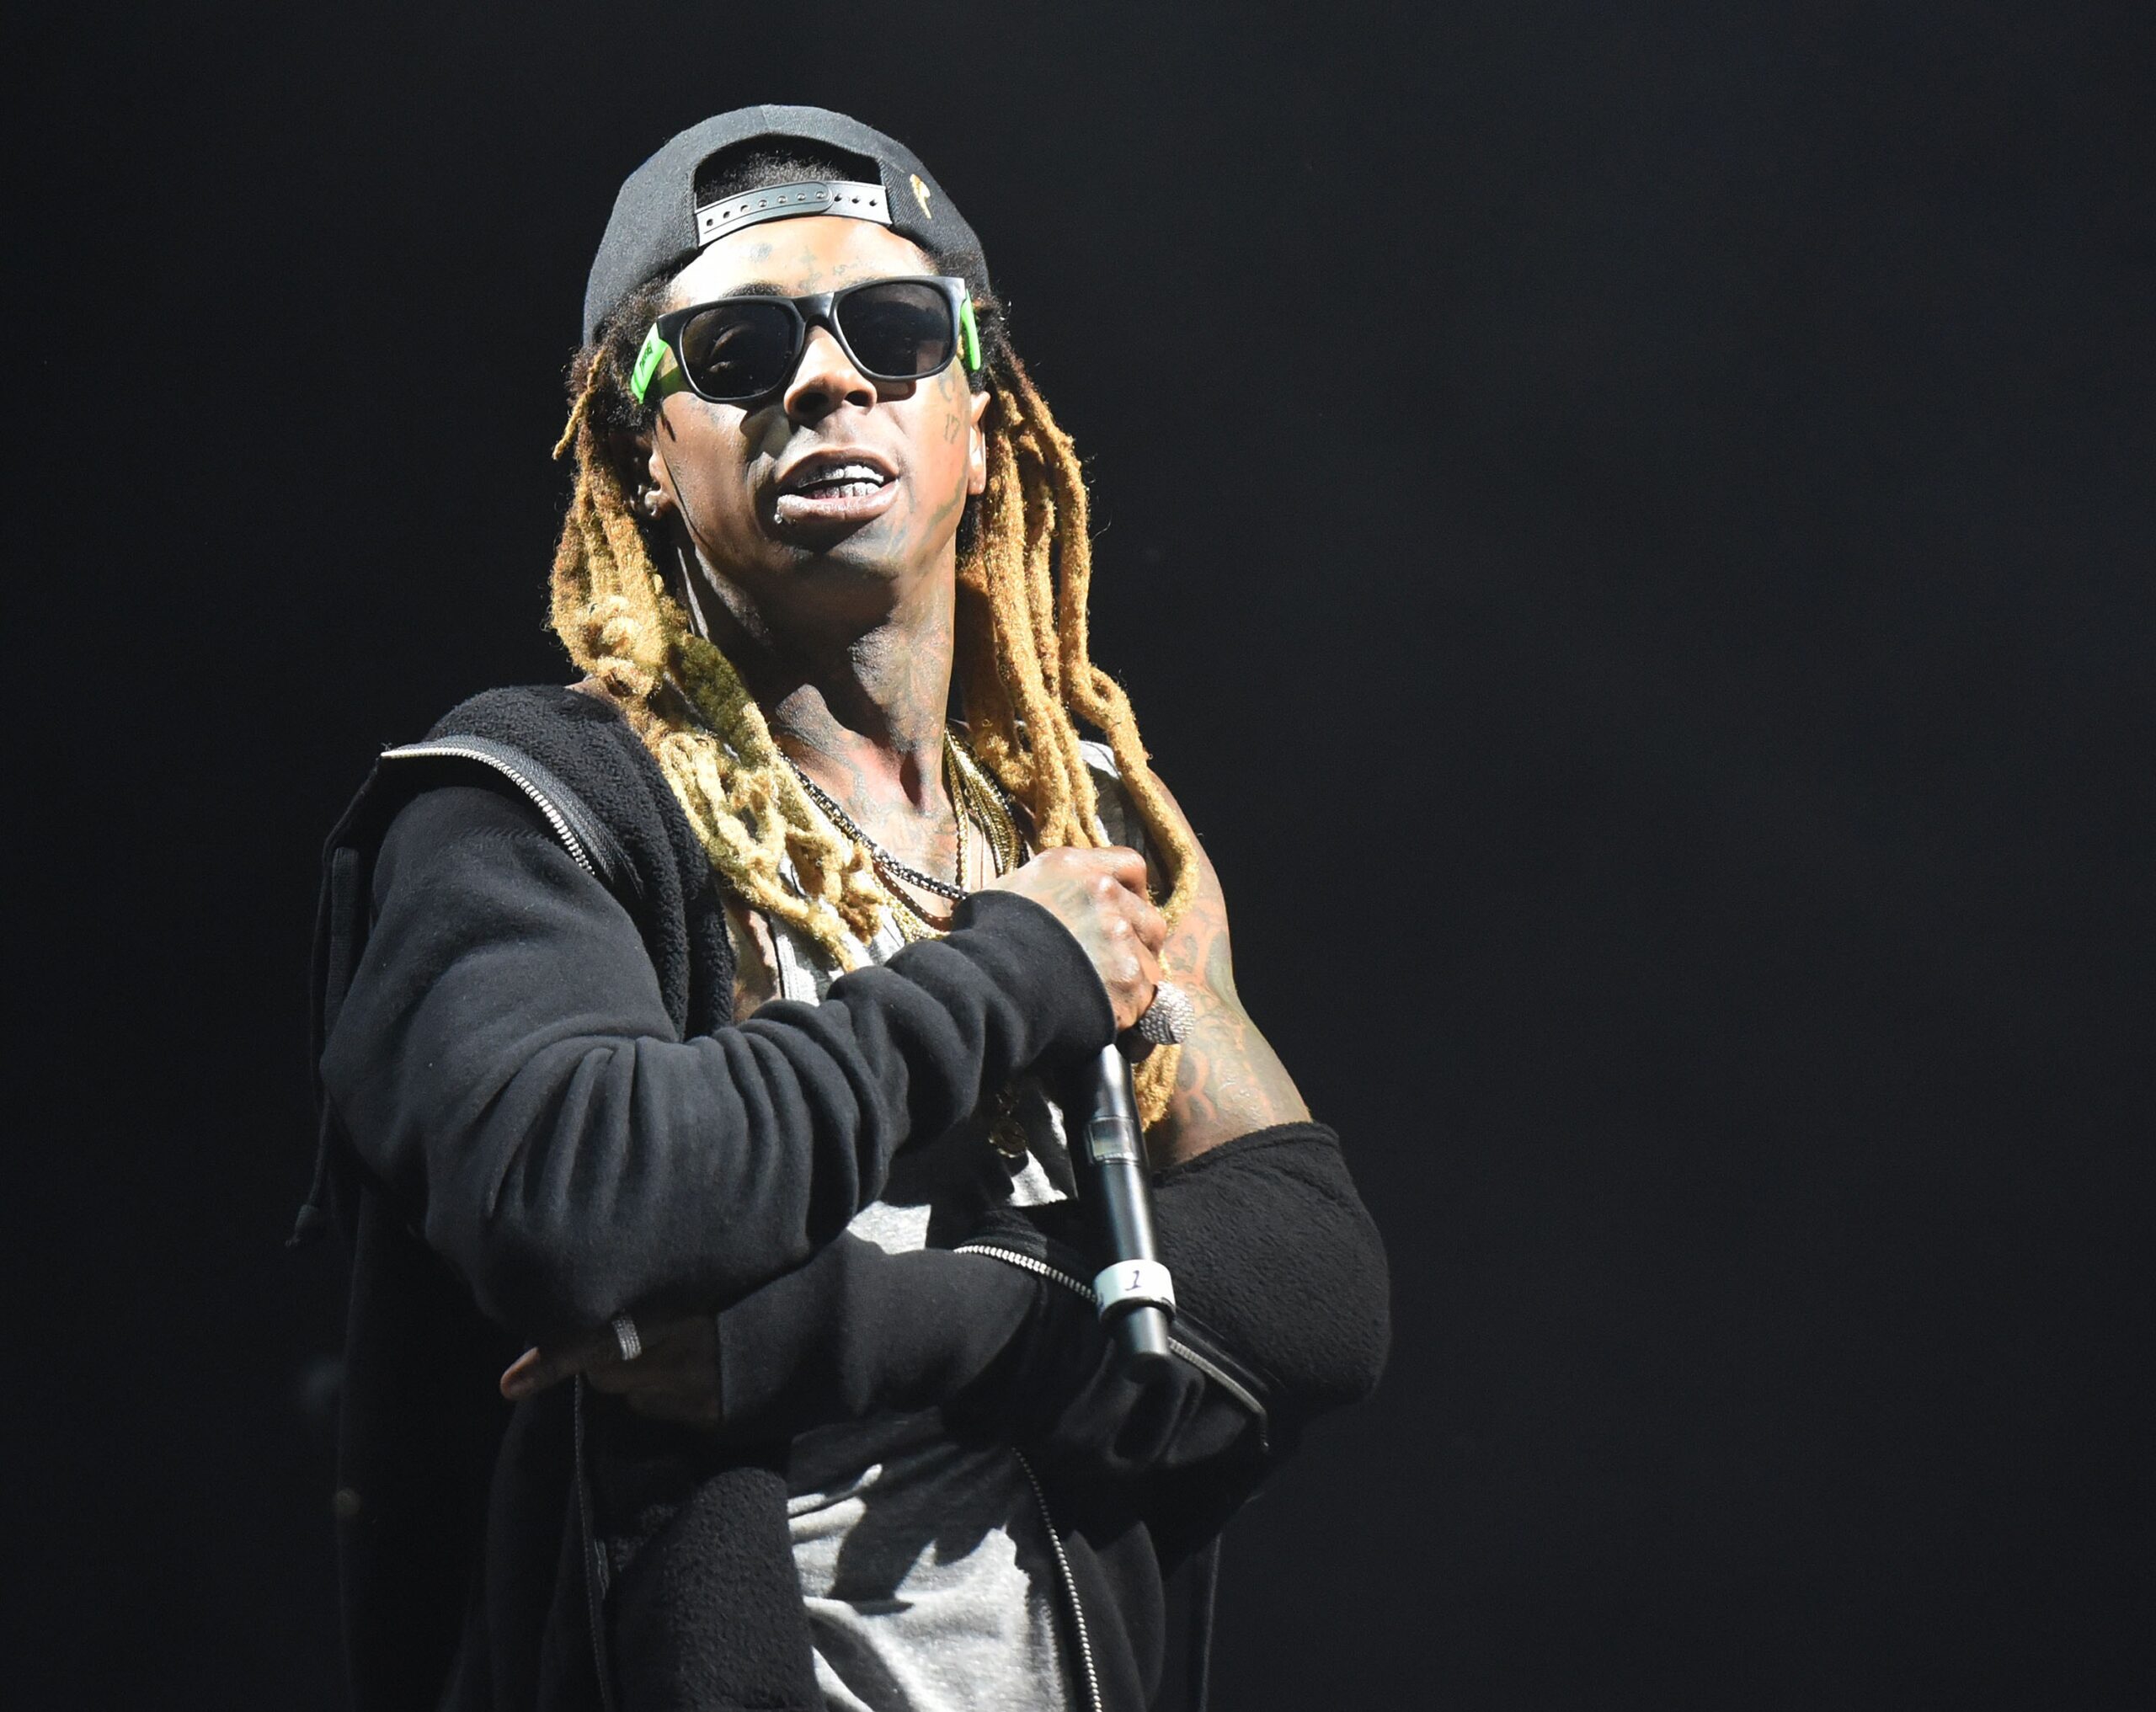 Happy 34th birthday to one of the best rappers ever Lil Wayne